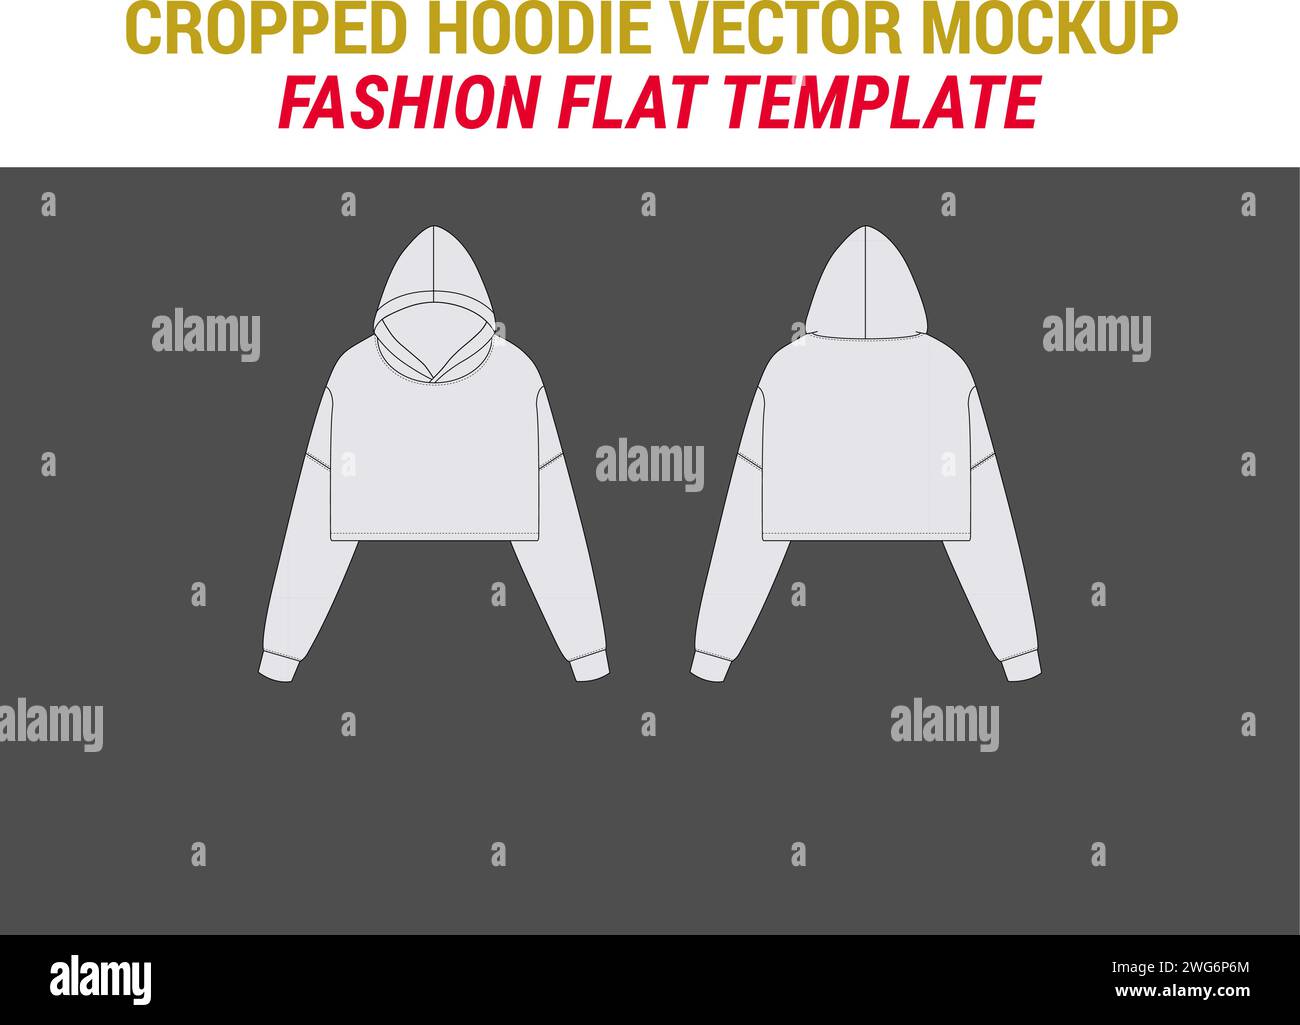 Cropped Hood Vector Fashion Flat Sketch Template Oversize Crop Hoodie Sweat Cropped Hoodie Template Hoodie Mockup Cropped Sweatshirt Hoodie Design Stock Vector